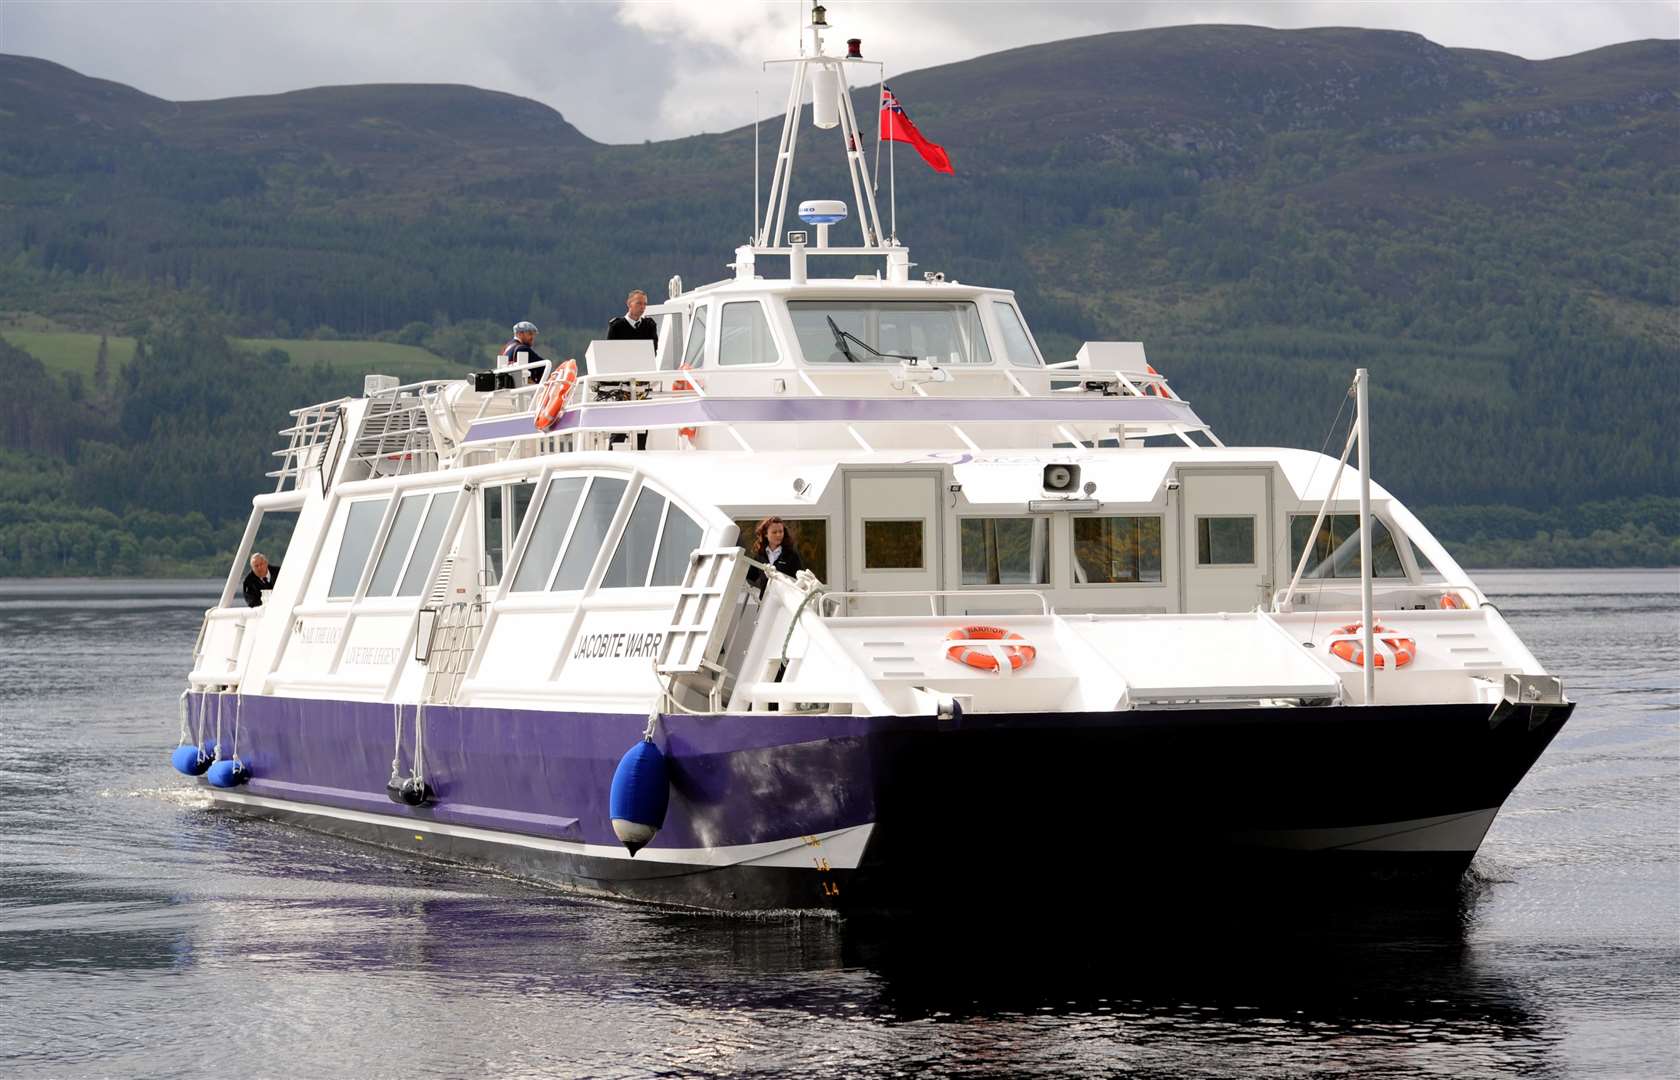 The hydro scheme could impact on the ability to operate boats, says Jacobite Cruises.